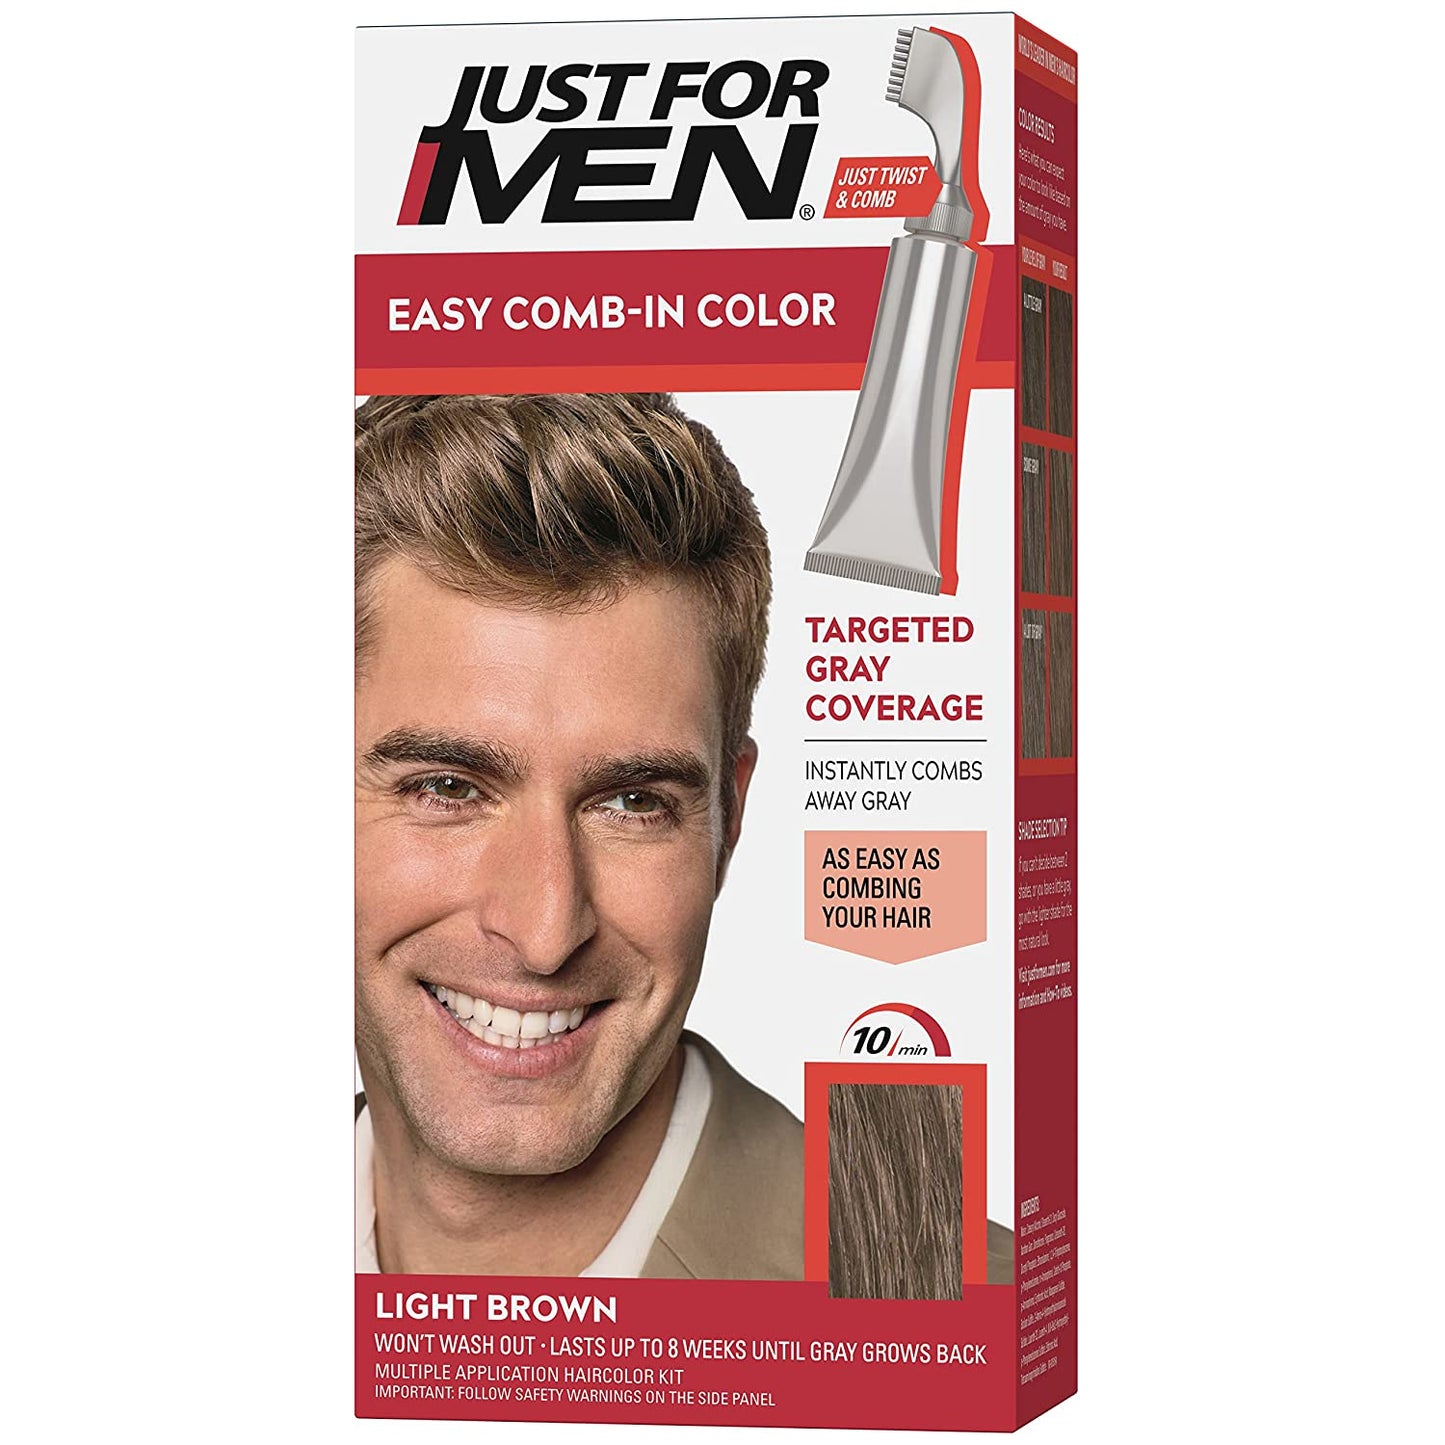 Just For Men Easy Comb-In Color Hair Coloring for Men with Comb Applicator